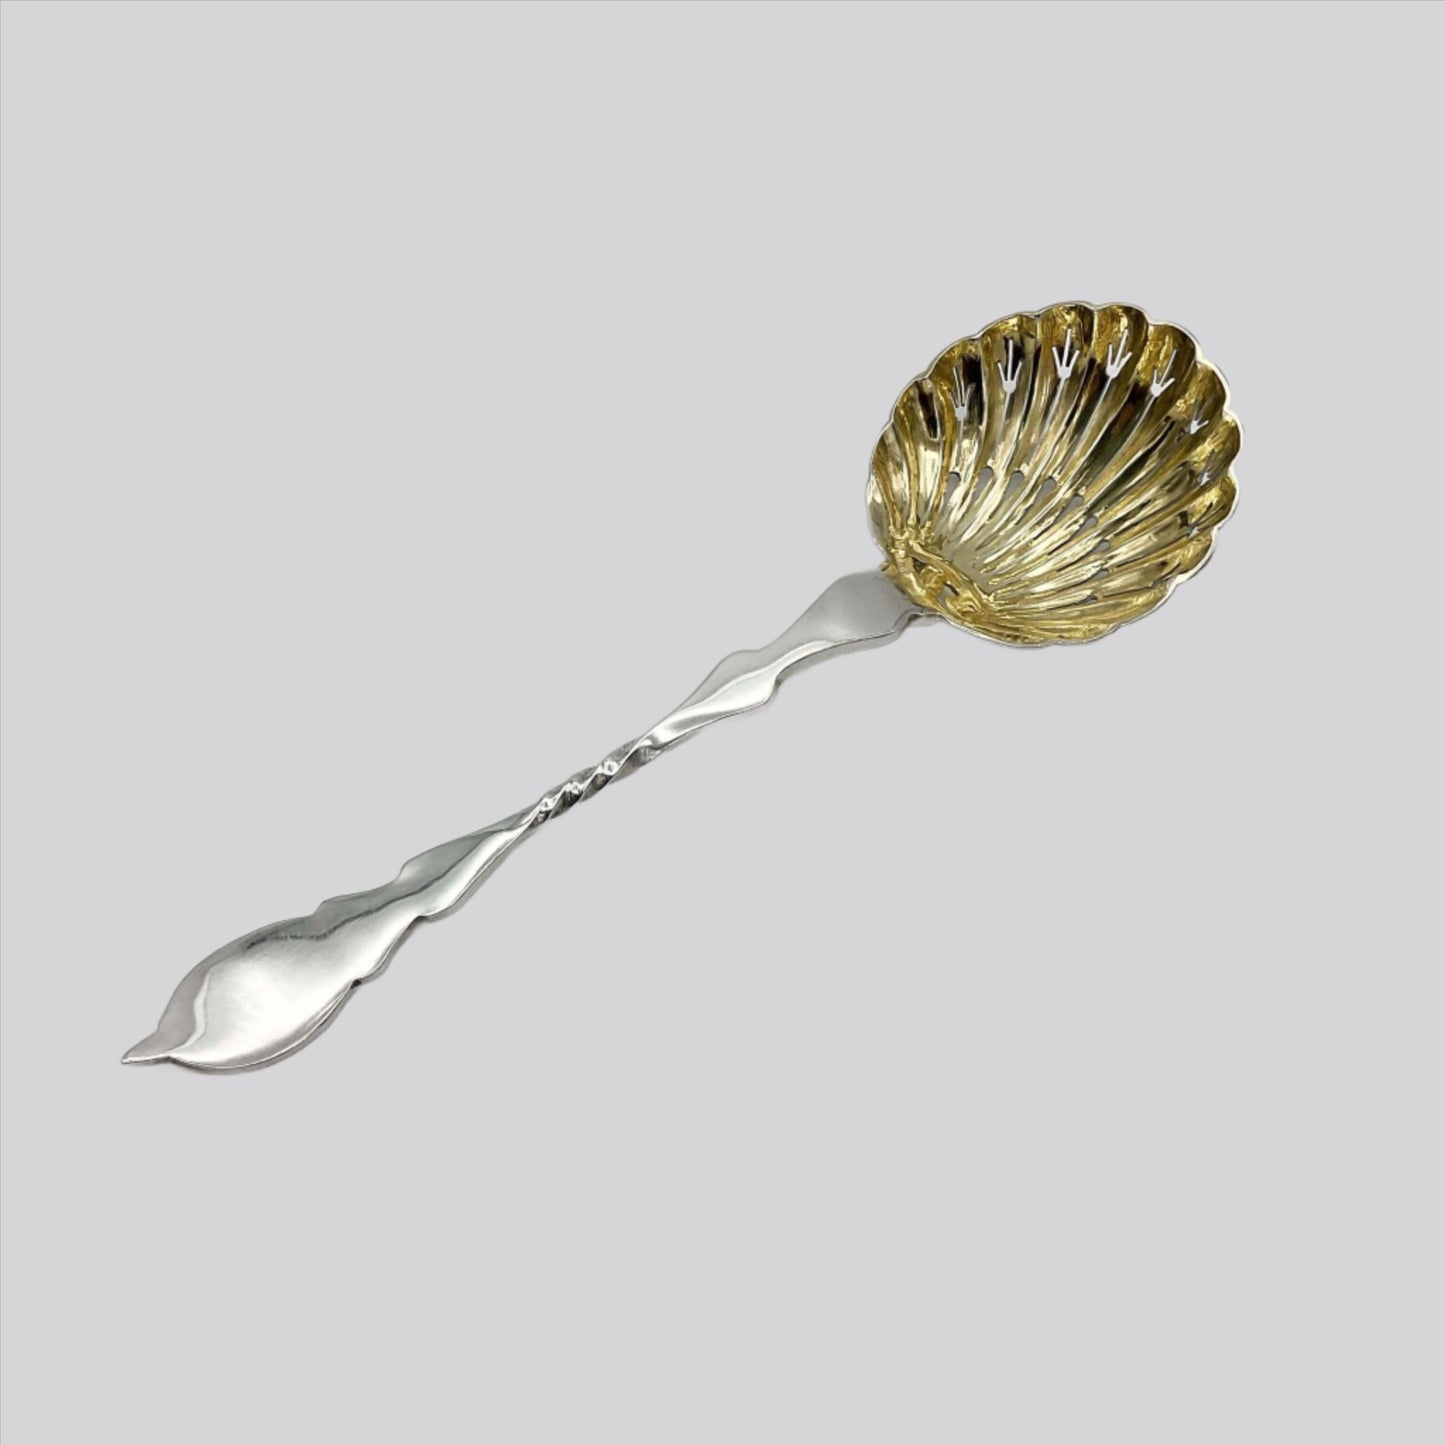 Beautiful gilded Silver sugar sifter spoon on a plain white background